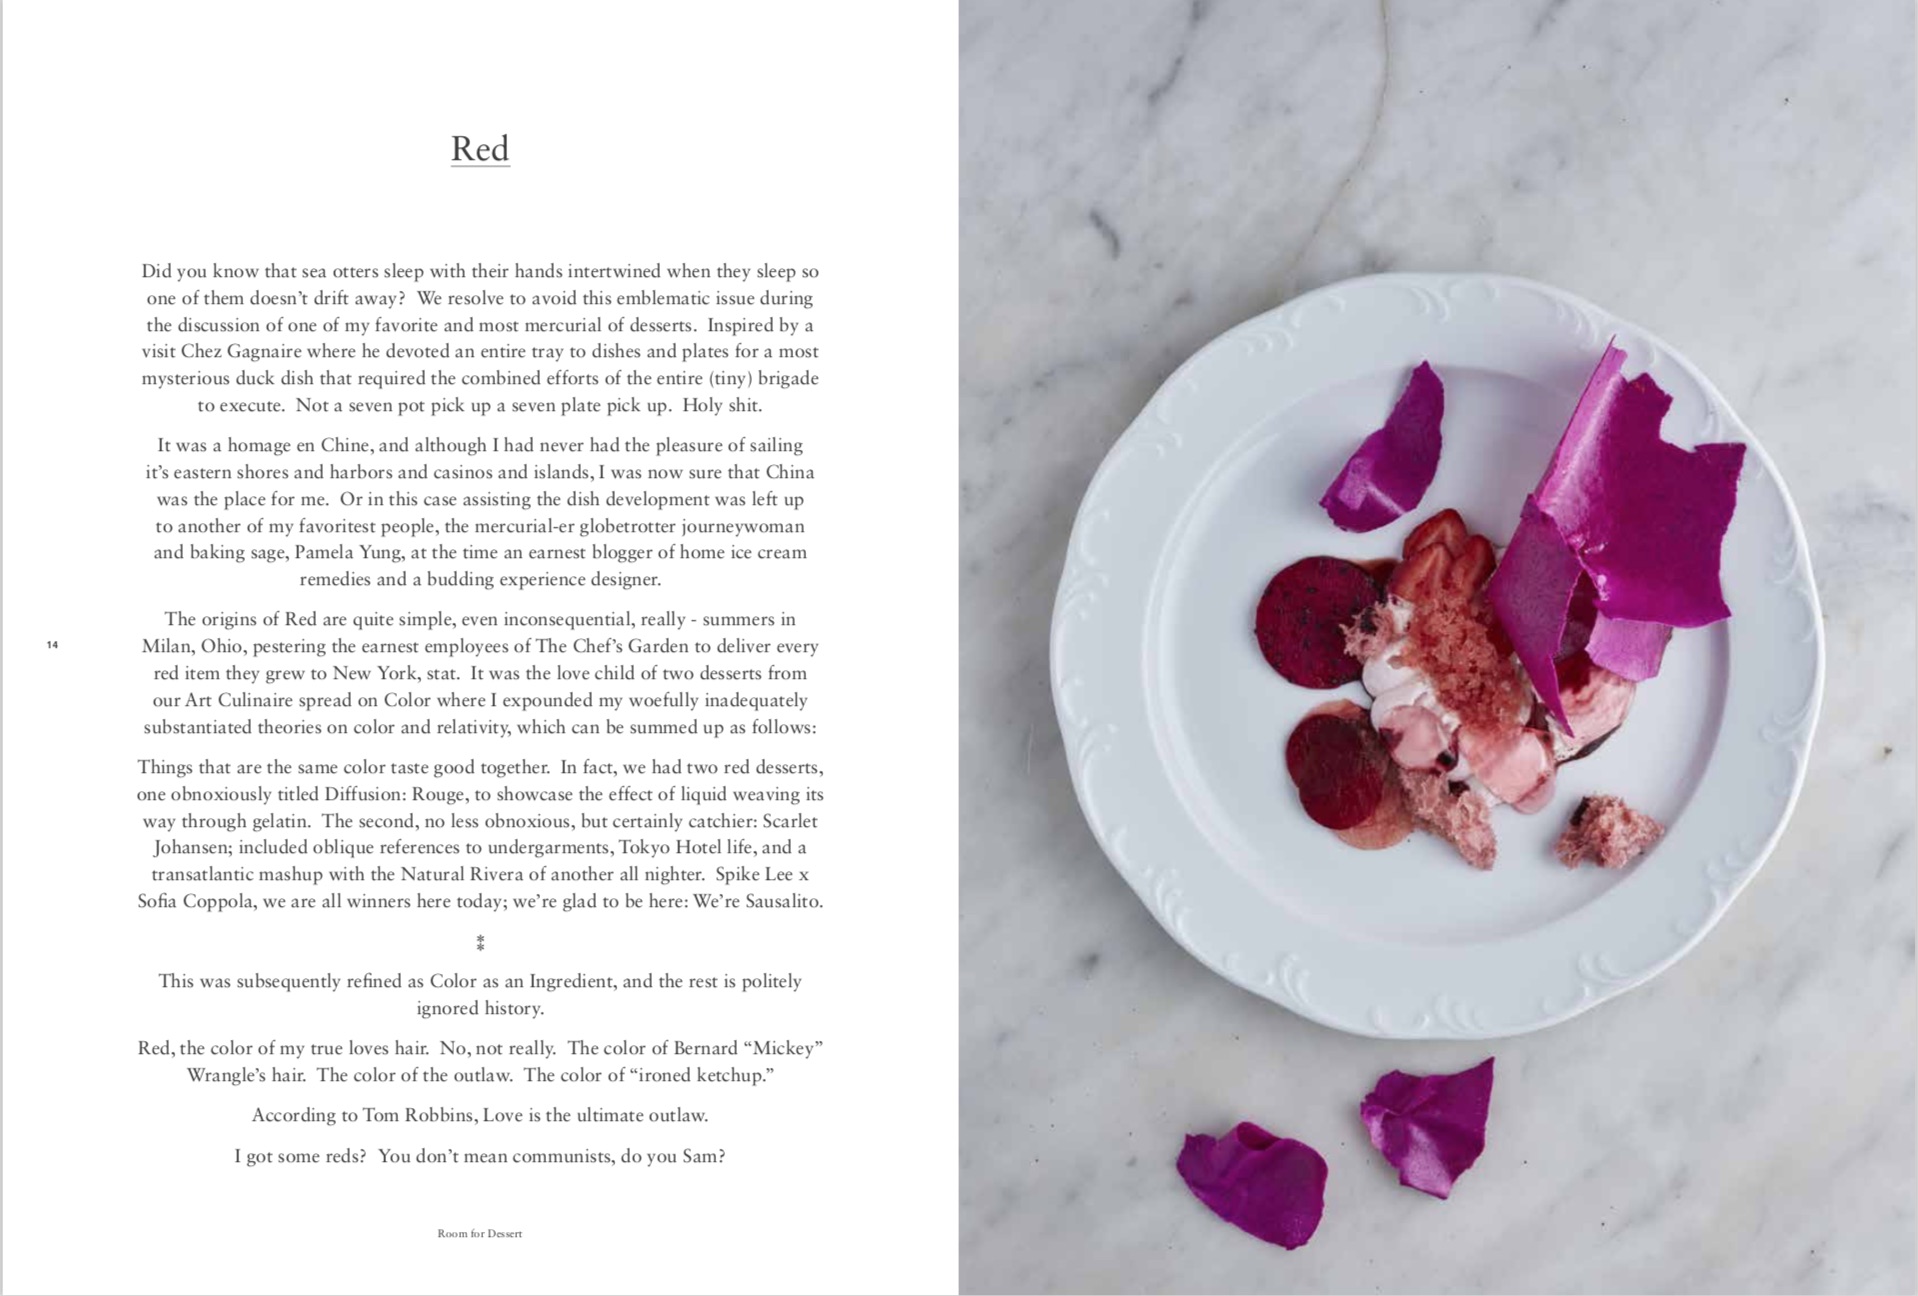 By Will Goldfarb from Room for Dessert copyright Phaidon 2018
